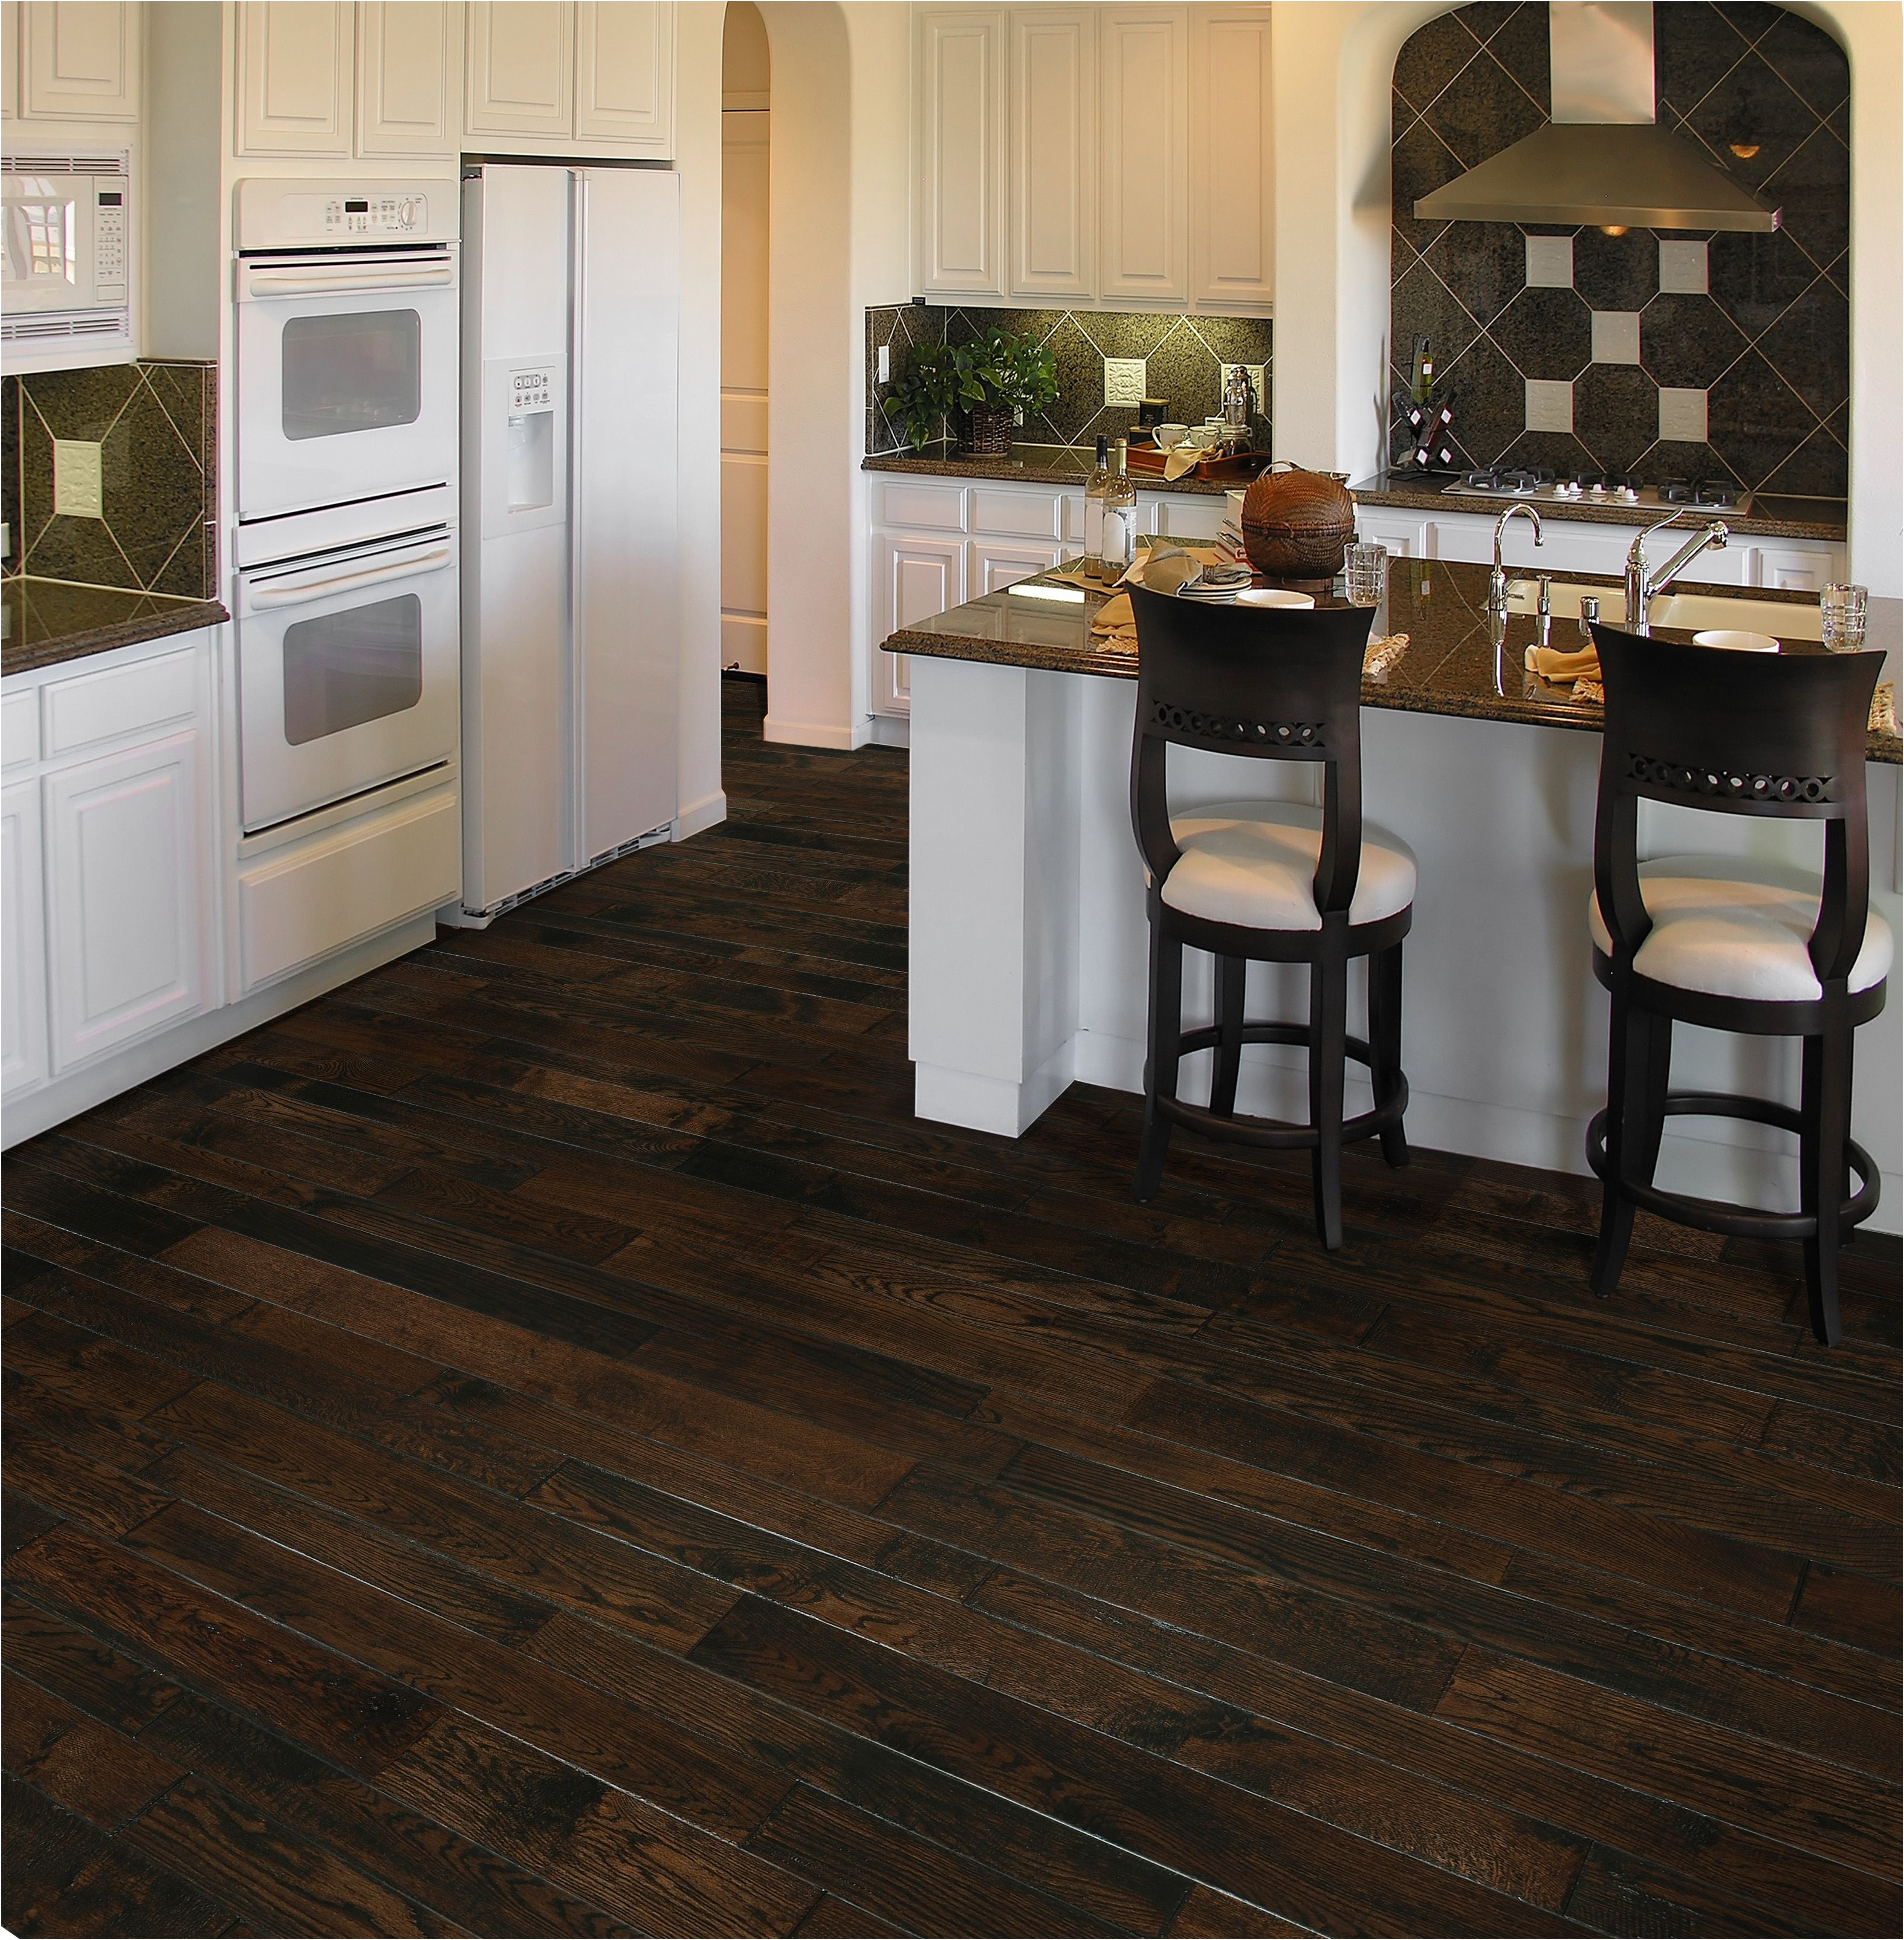 Prefinished Hardwood Flooring Reviews Of Prefinished Hardwood Flooring Pros and Cons Images Floor Hickory Intended for Prefinished Hardwood Flooring Pros and Cons Photographies Chalet White Oak Cortina Woodflooring Kansascity Flooring Of Prefinished